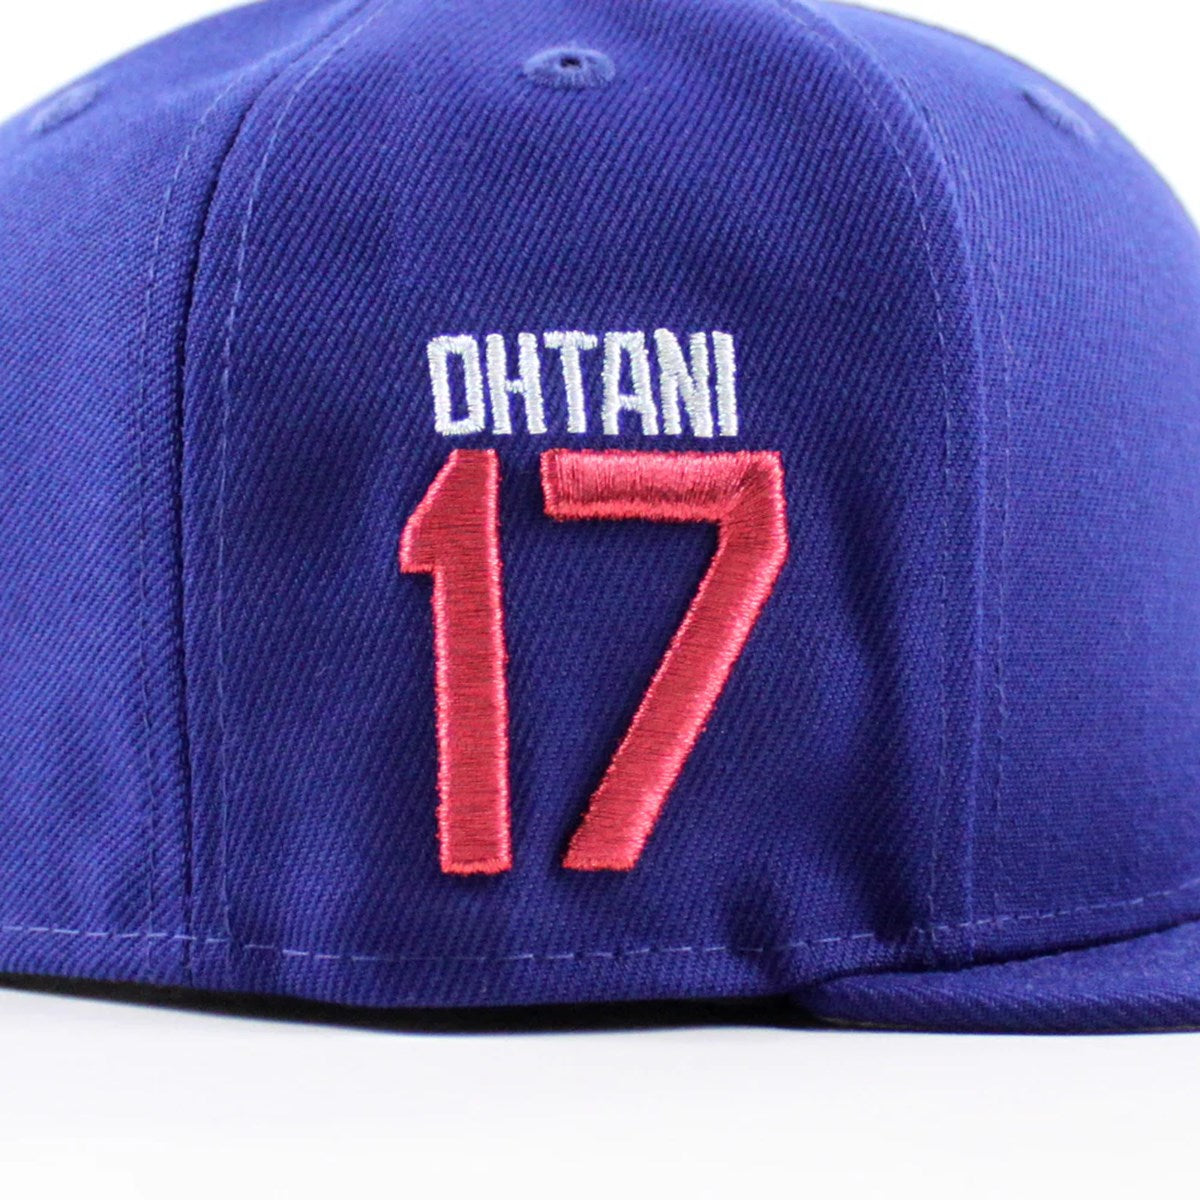 NEW ERA Los Angeles Dodgers - 59FIFTY 17 Ohtani Patch【400914240656】